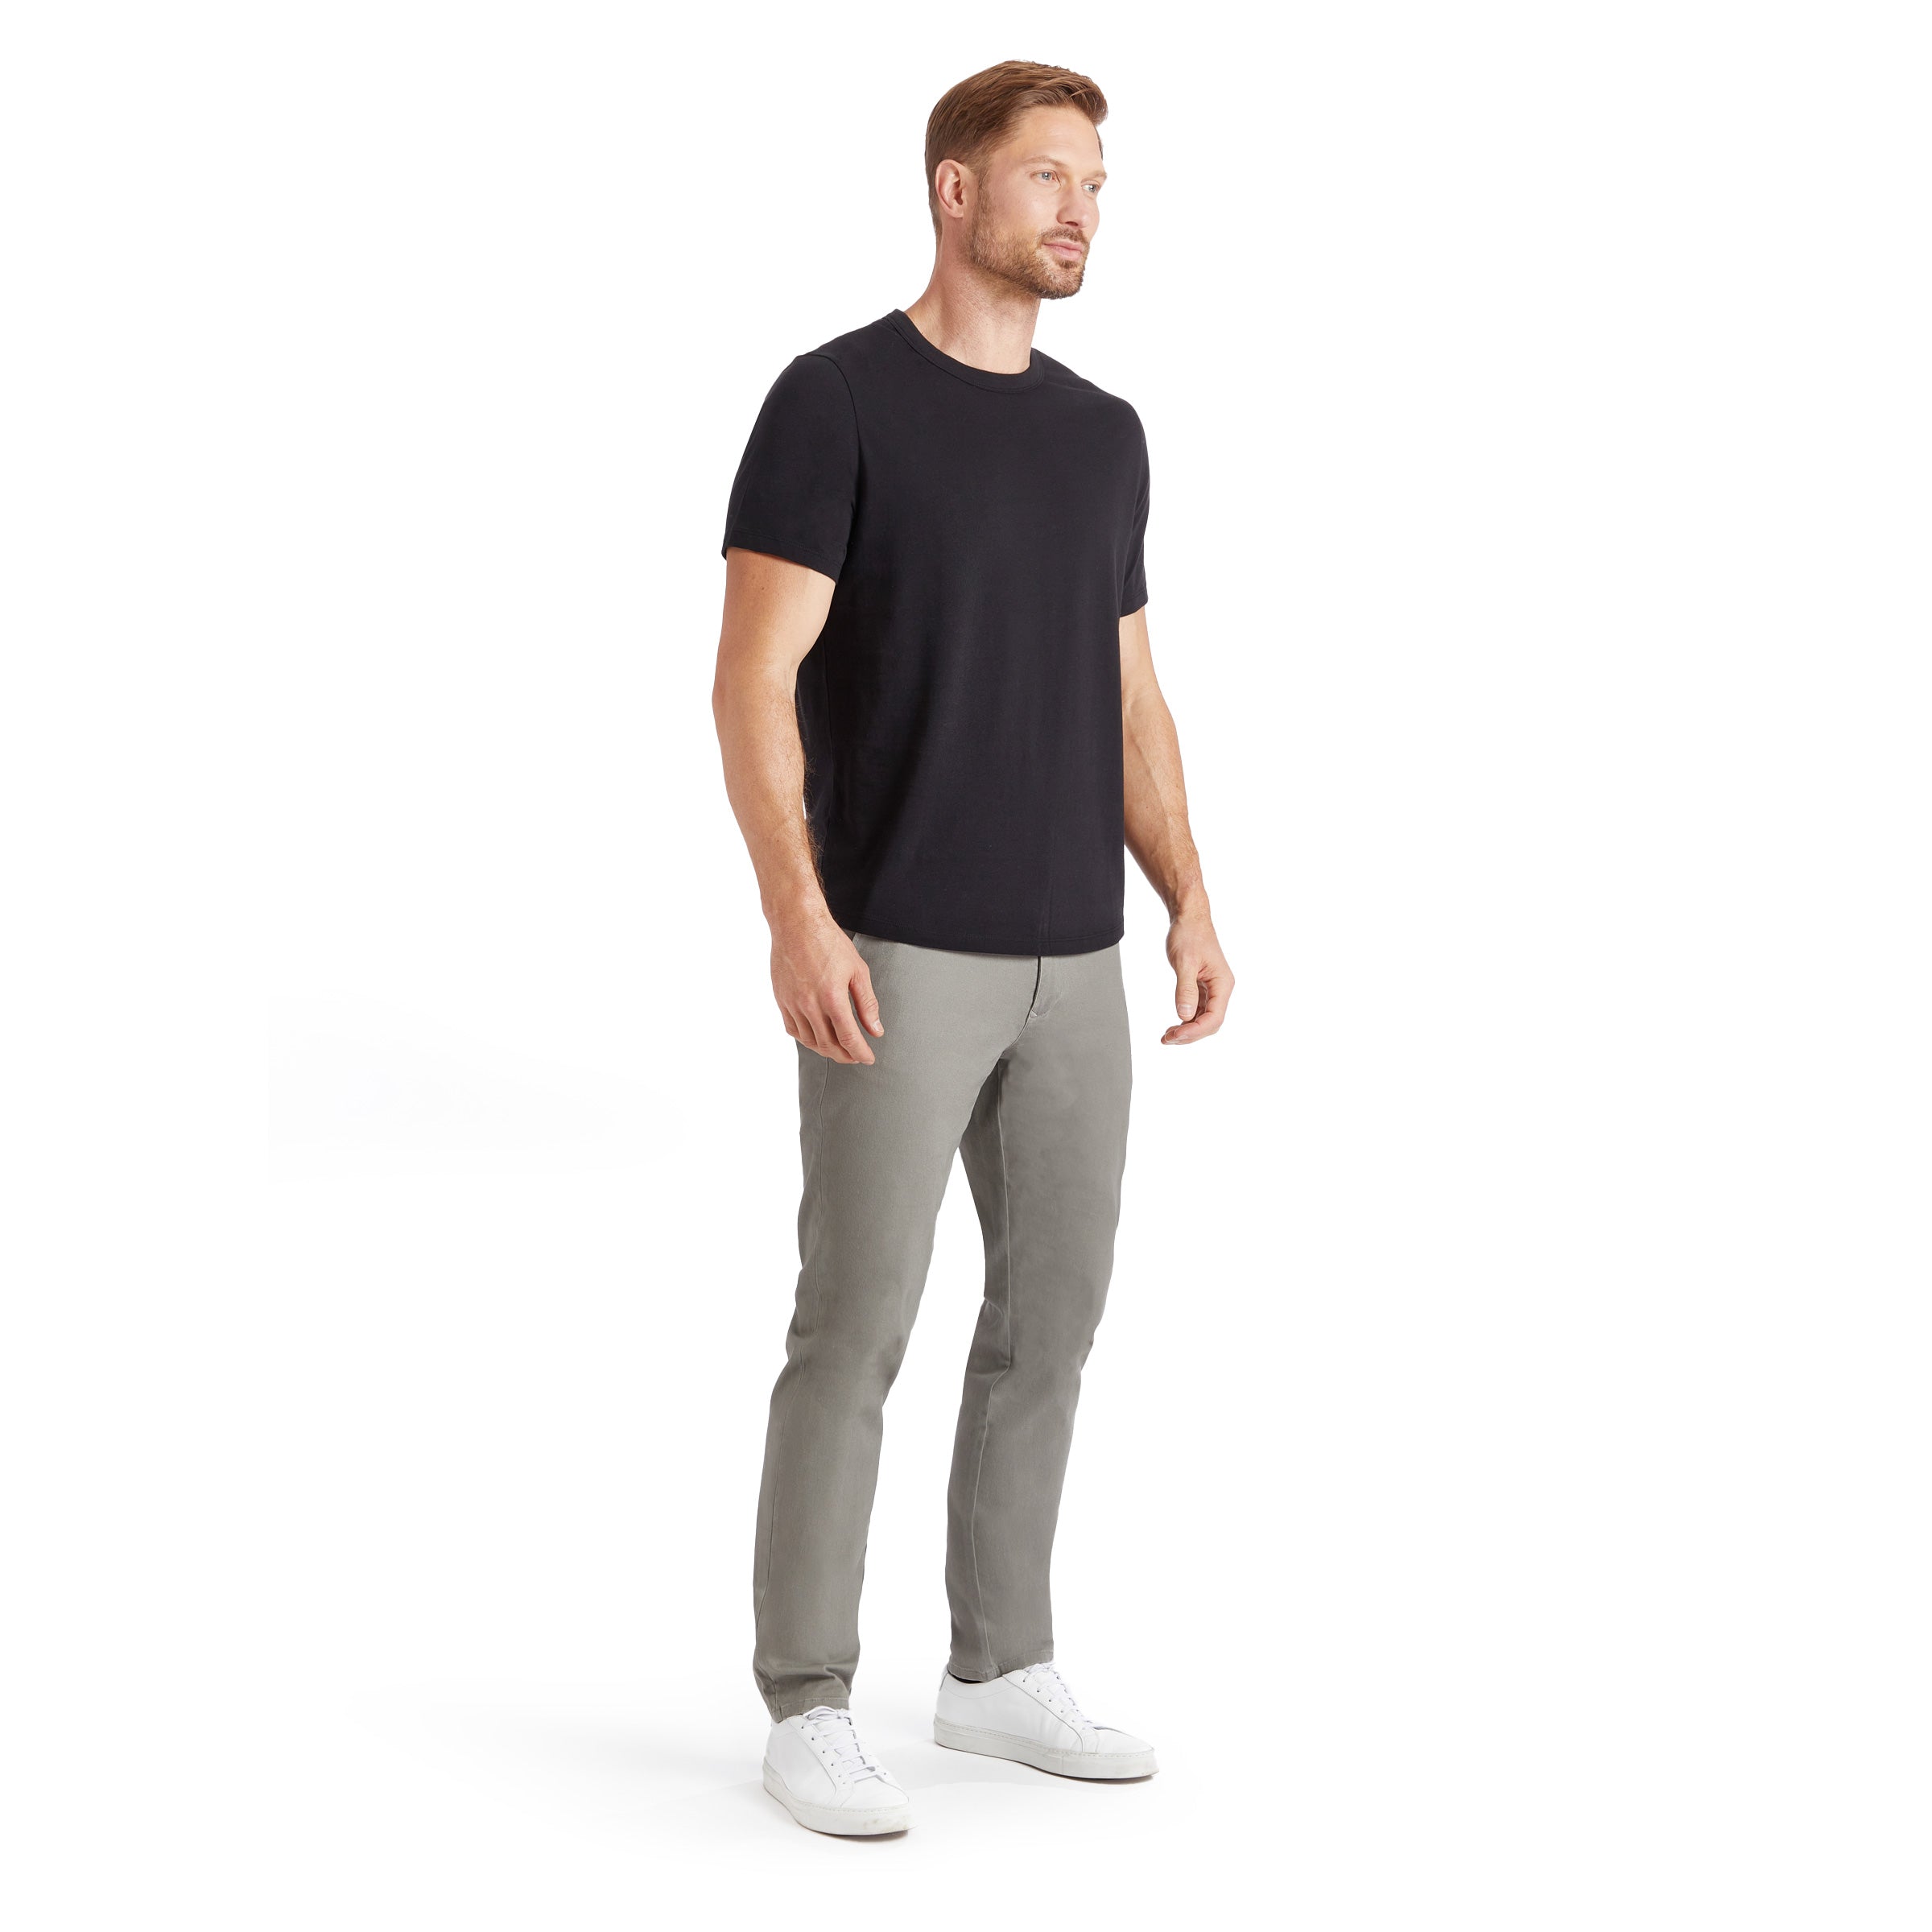 Men wearing Gris Clair The Twill Chino Charles